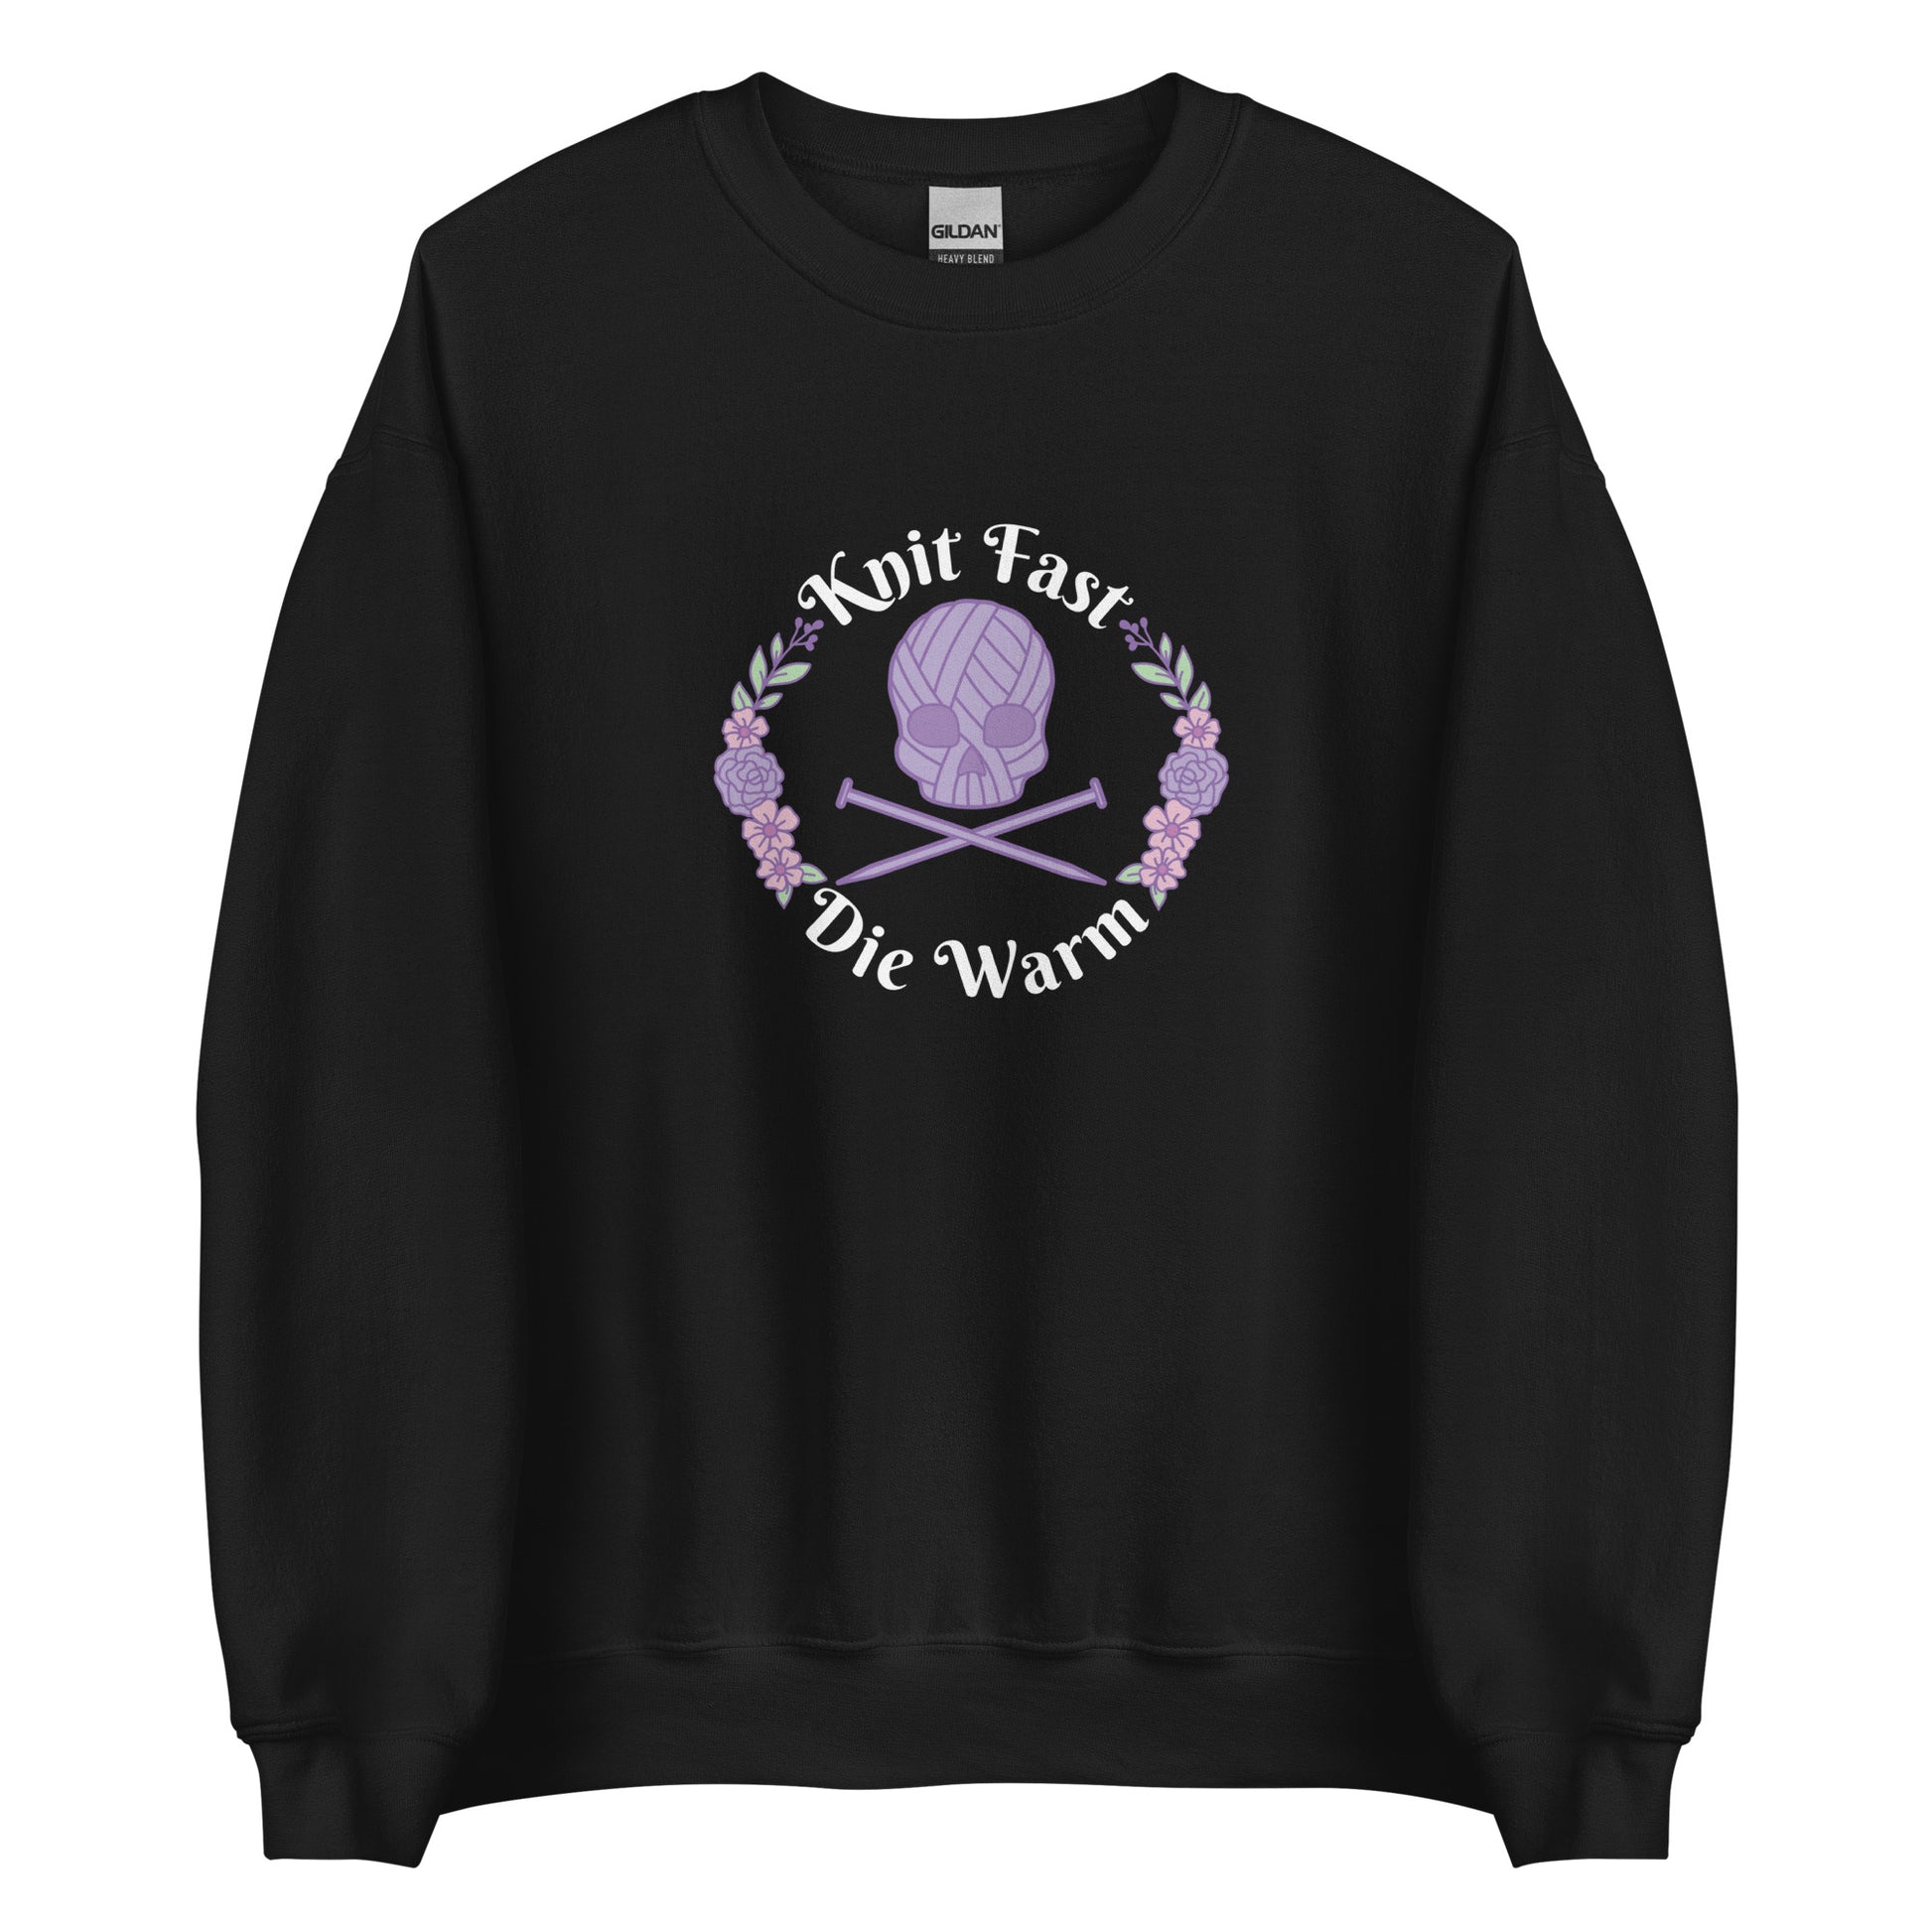 A black crewneck sweatshirt featuring an image of a skull and crossbones made of yarn and knitting needles. A floral wreath surrounds the skull, along with words that read "Knit Fast, Die Warm"